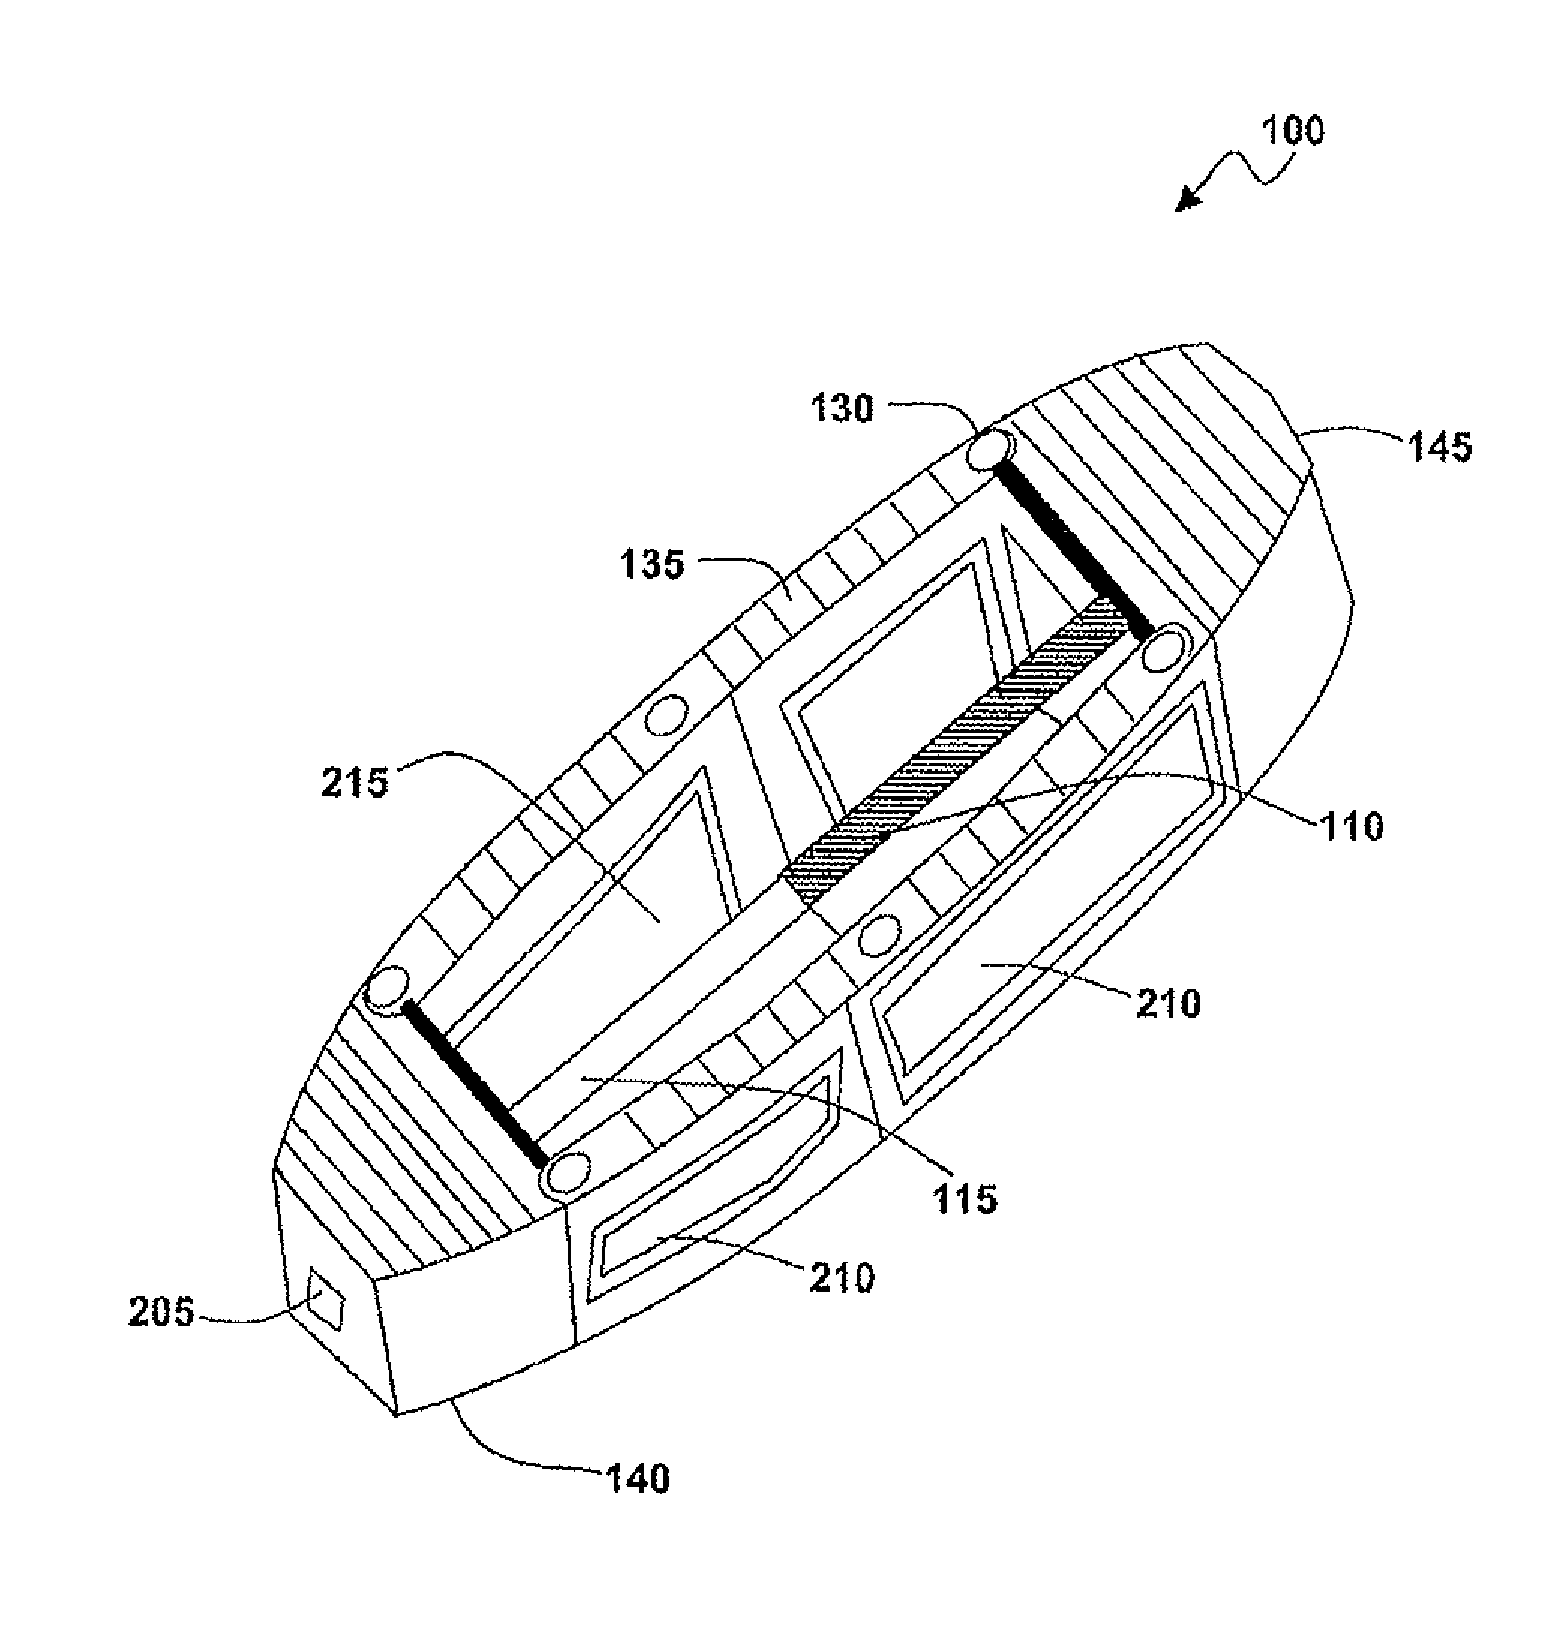 Implant apparatus and method including tee and screw mechanism for spinal fusion